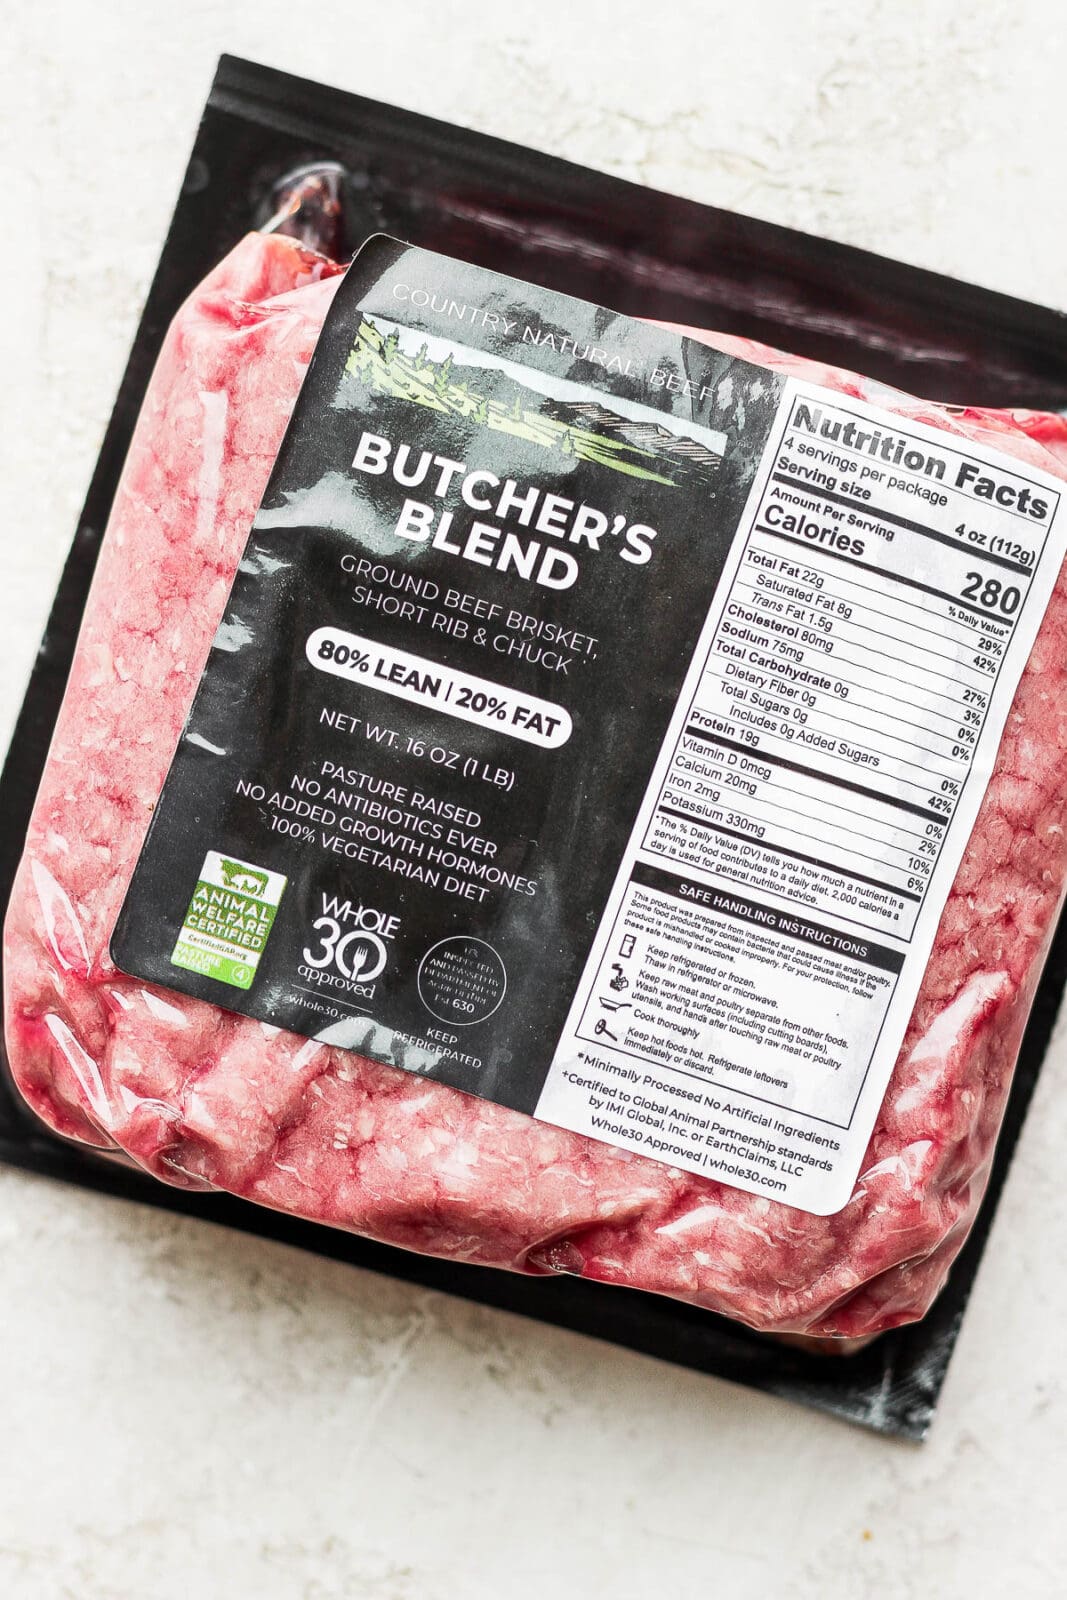 Package of Country Natural Beef's butcher blend ground beef.